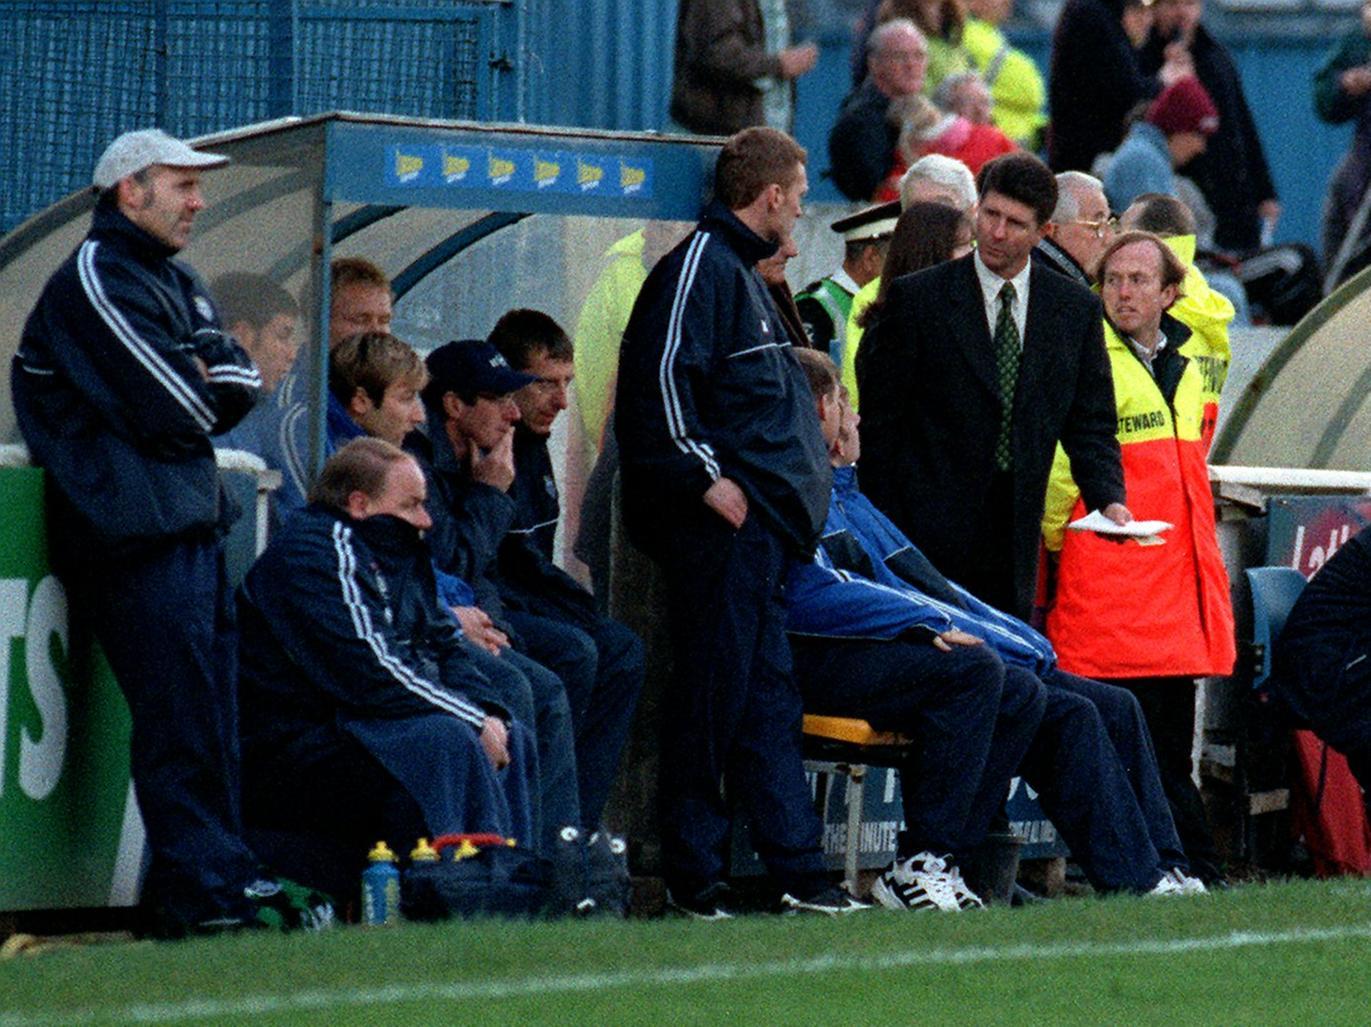 PNE manager Gary Peters talks to assistant David Moyes, while physio Mick Rathbone has a standing view from the dug out at Springfield Park in 1997